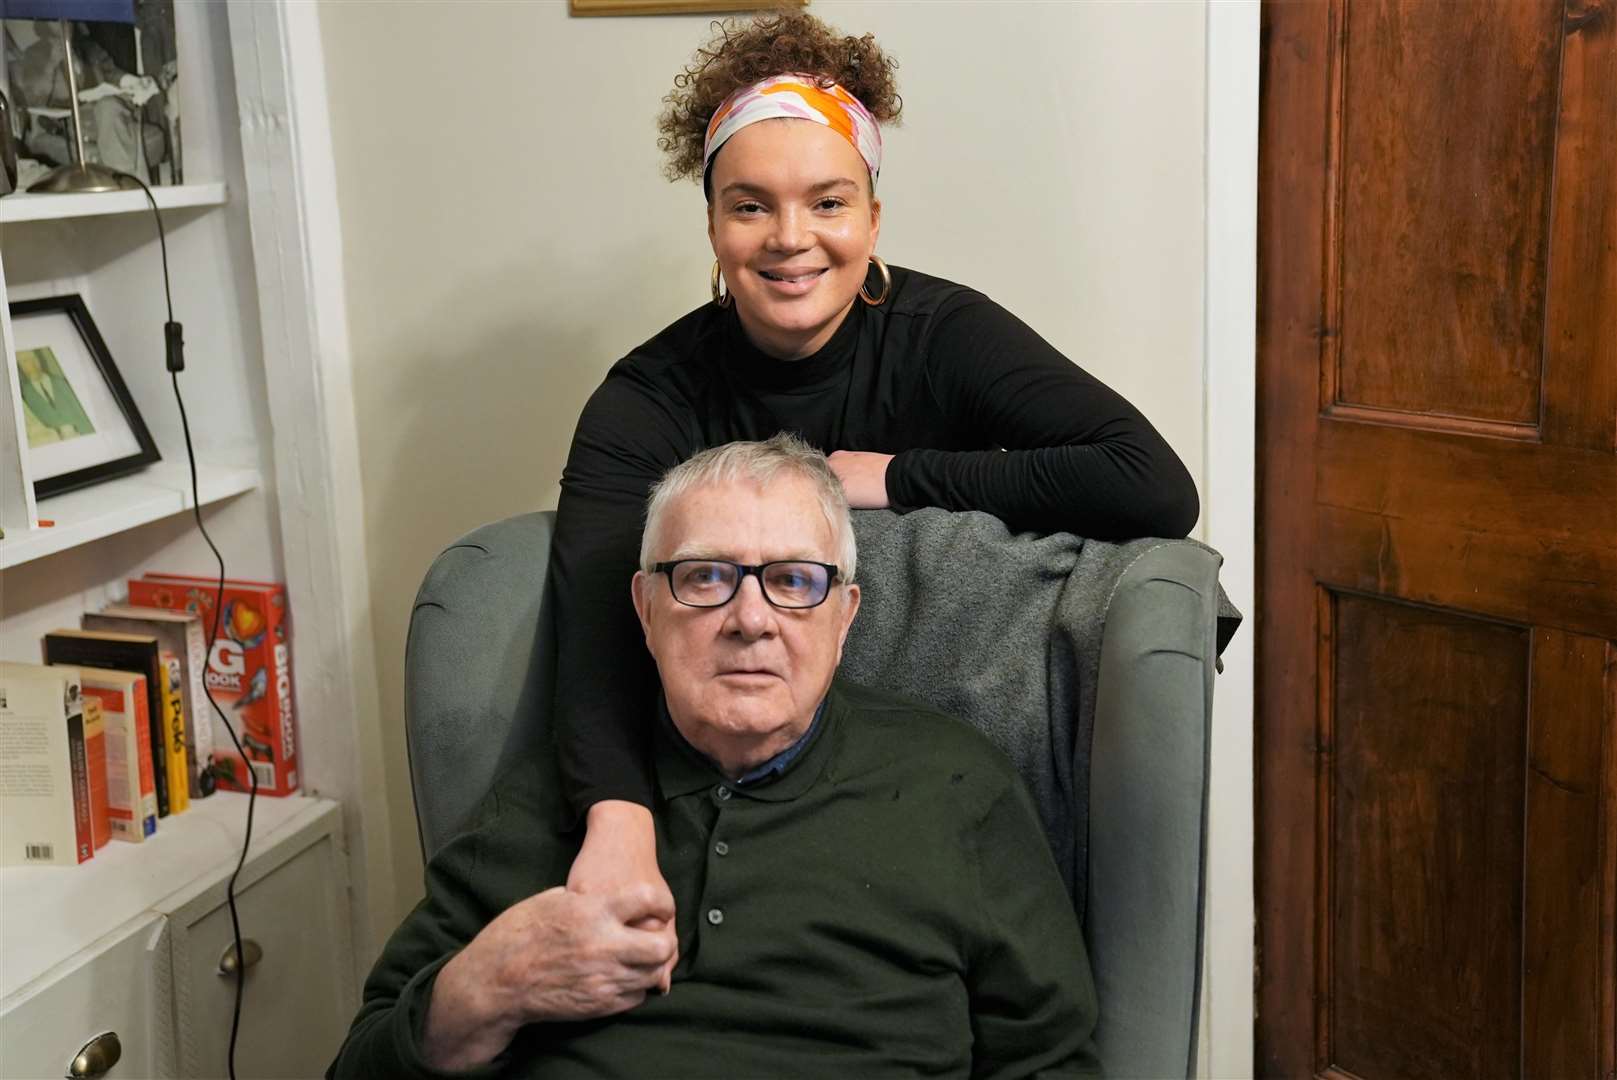 Cass Ezeji pictured here with her granddad George McNally.